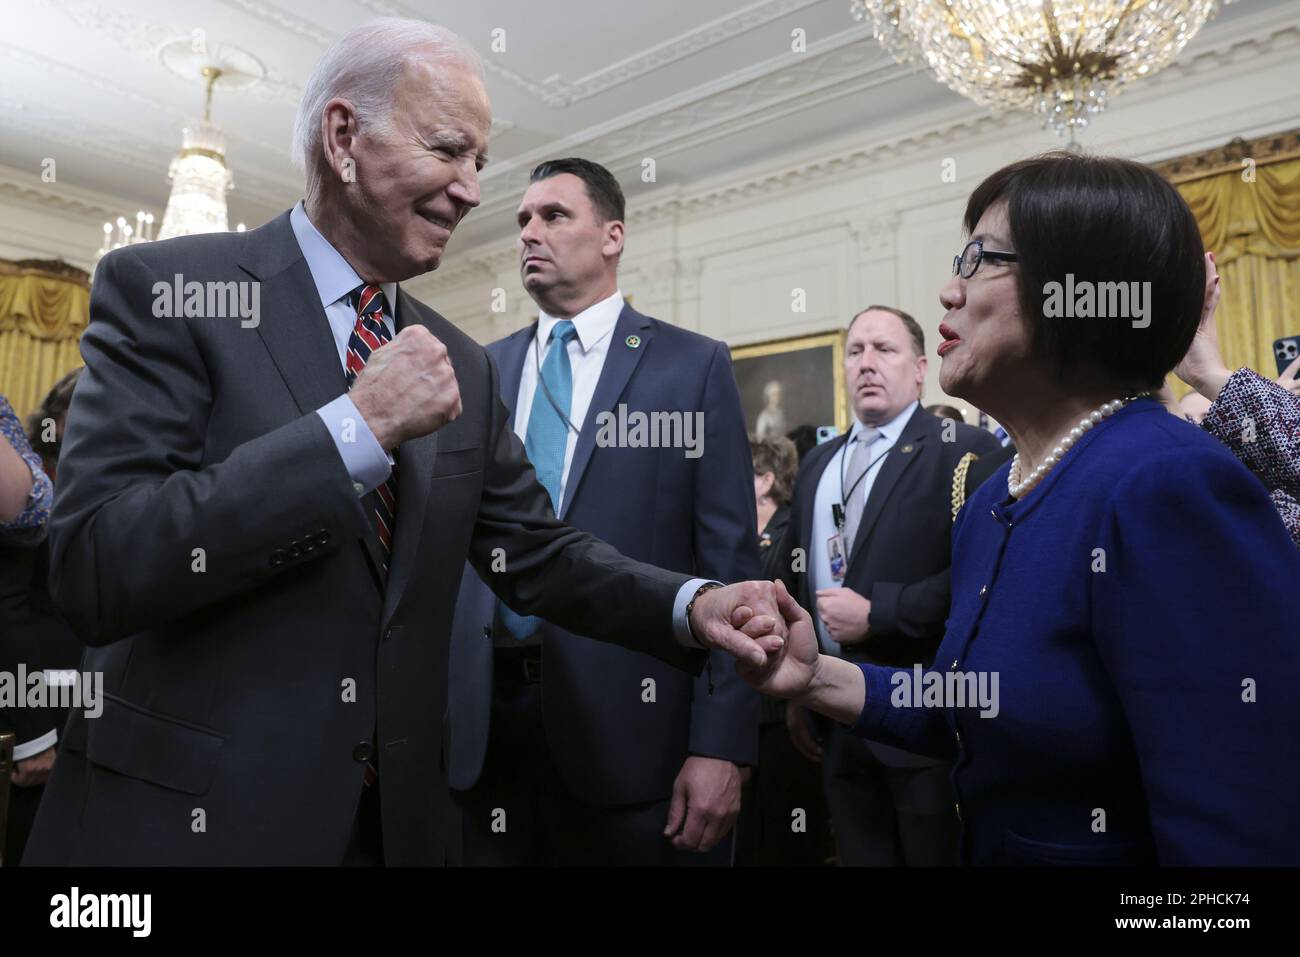 Washington, United States. 27th Mar, 2023. U.S. President Joe Biden greets people after speaking at the SBA Women's Business Summit in the East Room of the White House in Washington DC on Monday, March 27, 2023. (Photo by Oliver Contreras/UPI Credit: UPI/Alamy Live News Stock Photo